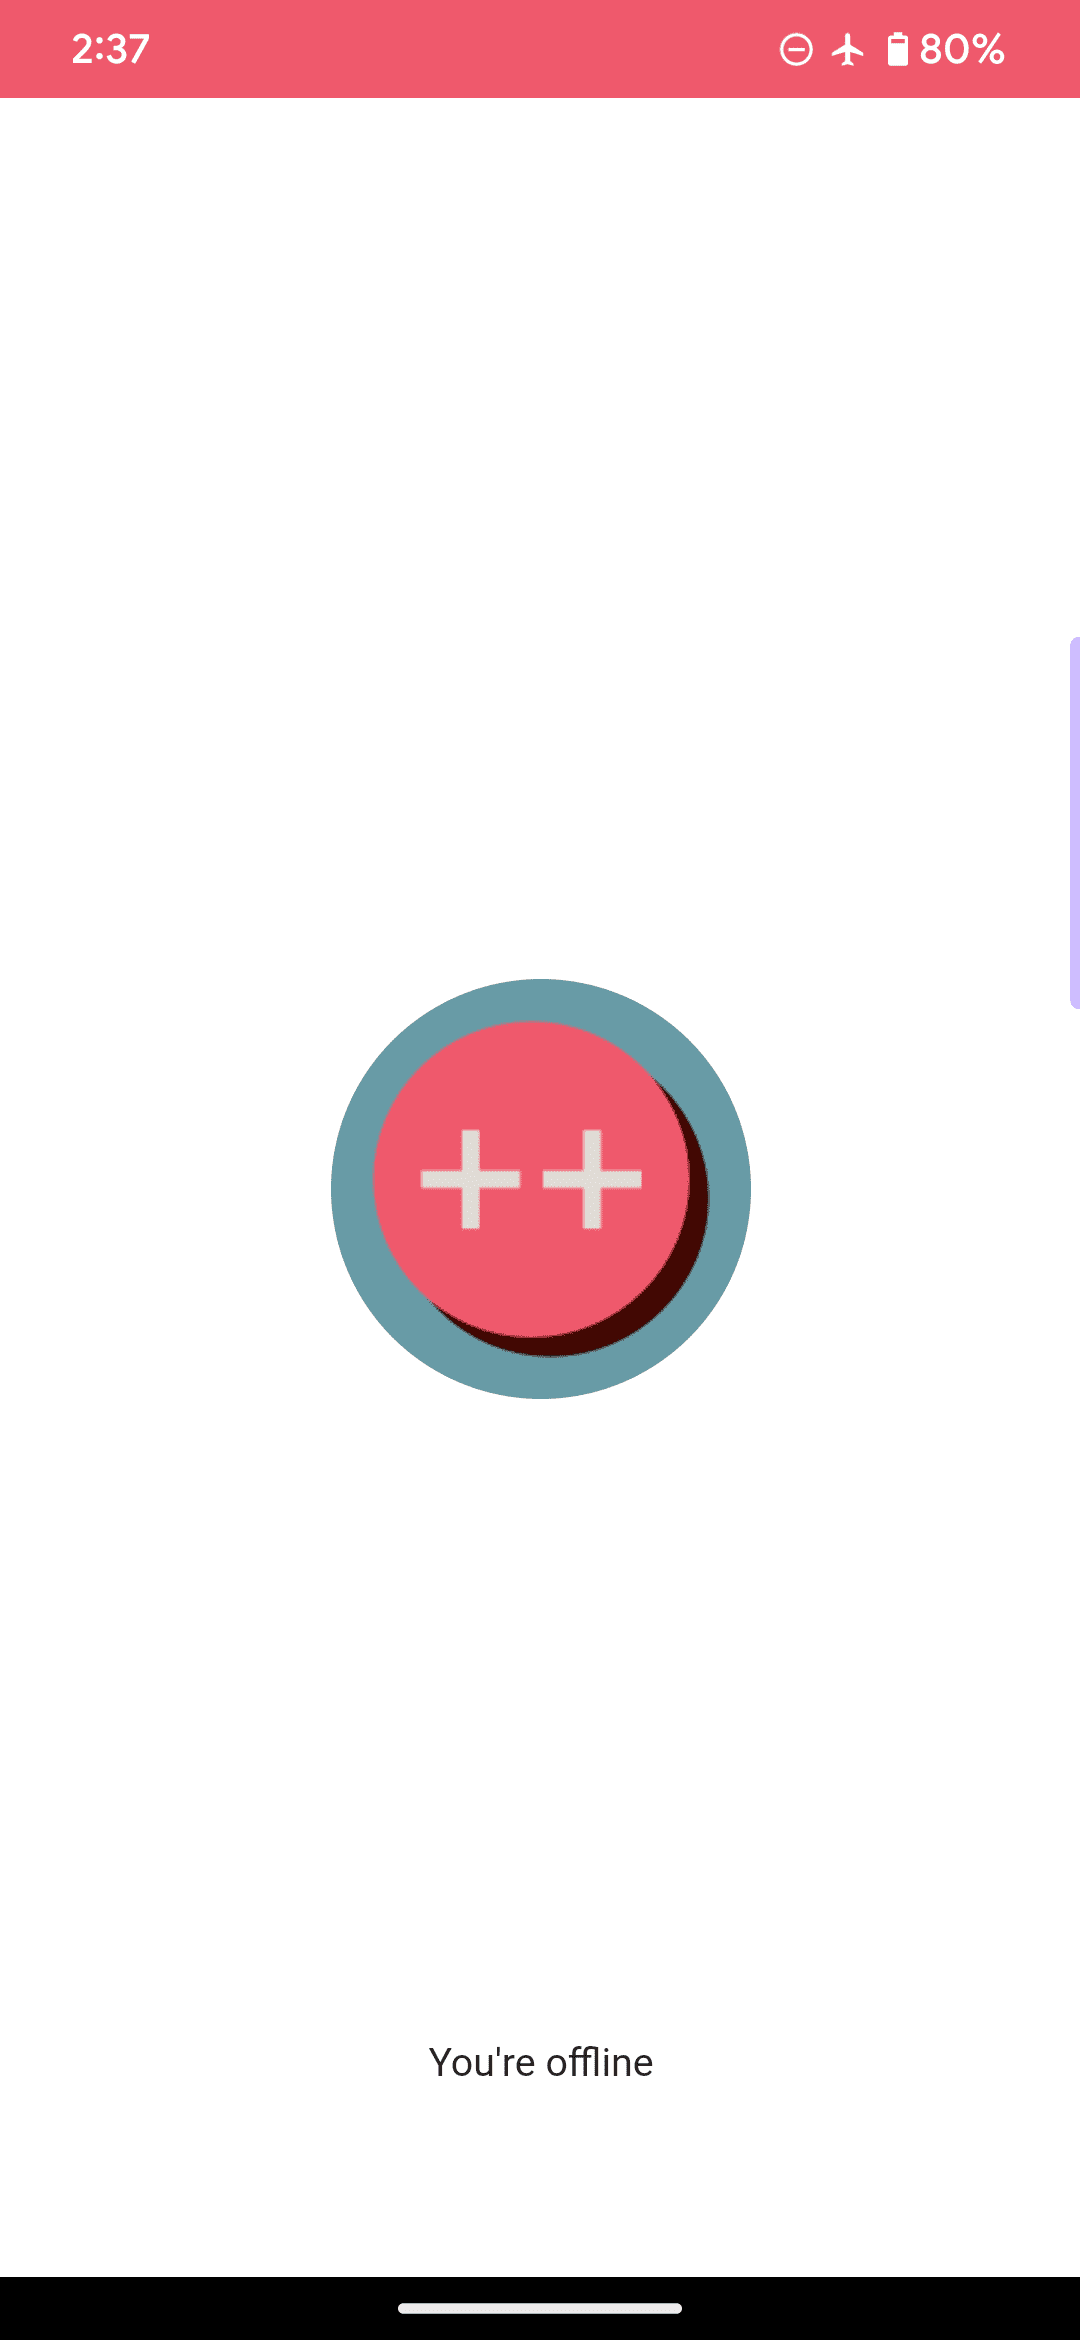 The default offline page for an example web app, where the logo is a pink circle and two plus signs, and it includes the message 'you are offline'.